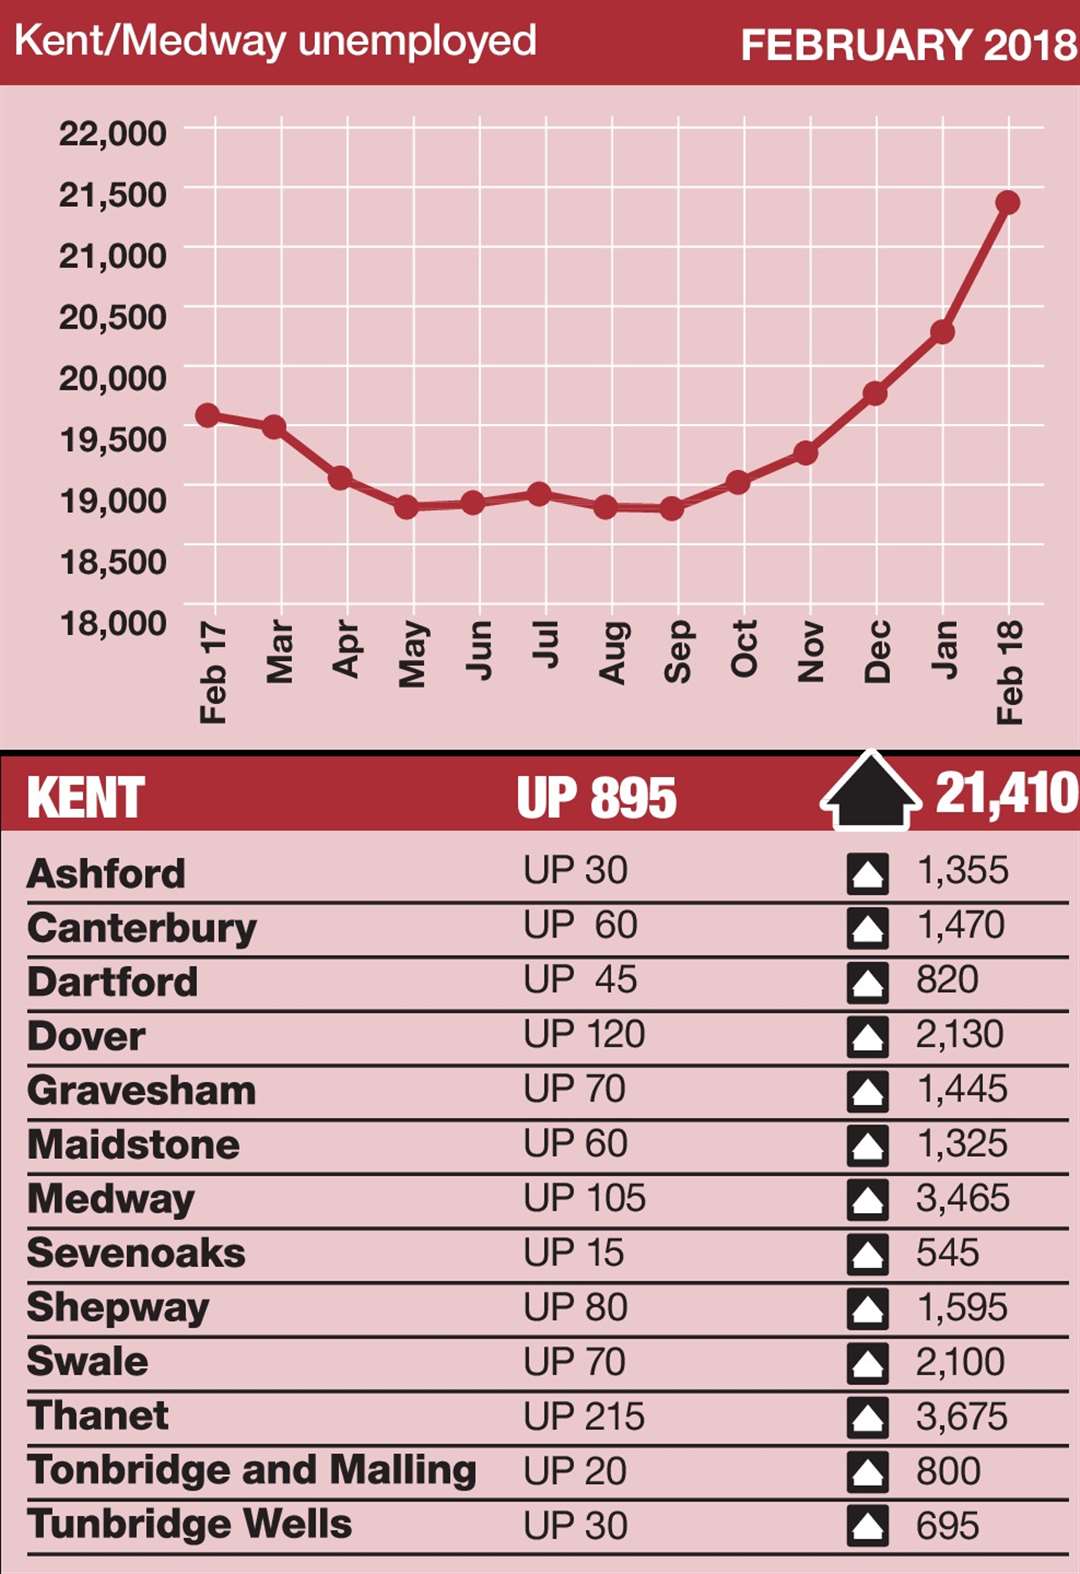 Kent's claimant count has gone up for five straight months